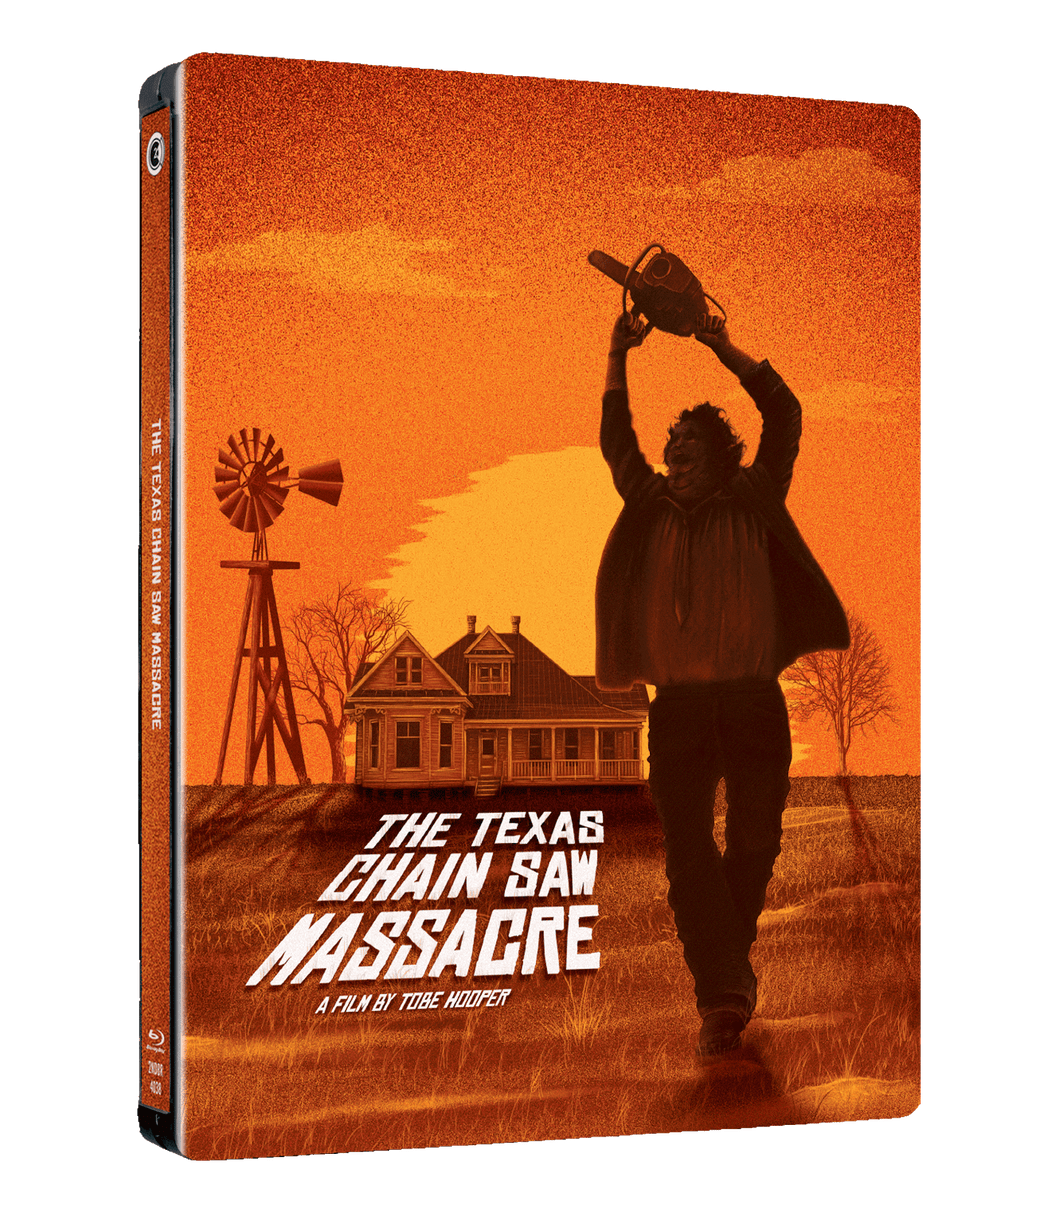 The Texas Chain Saw Massacre Steelbook - OUT OF PRINT